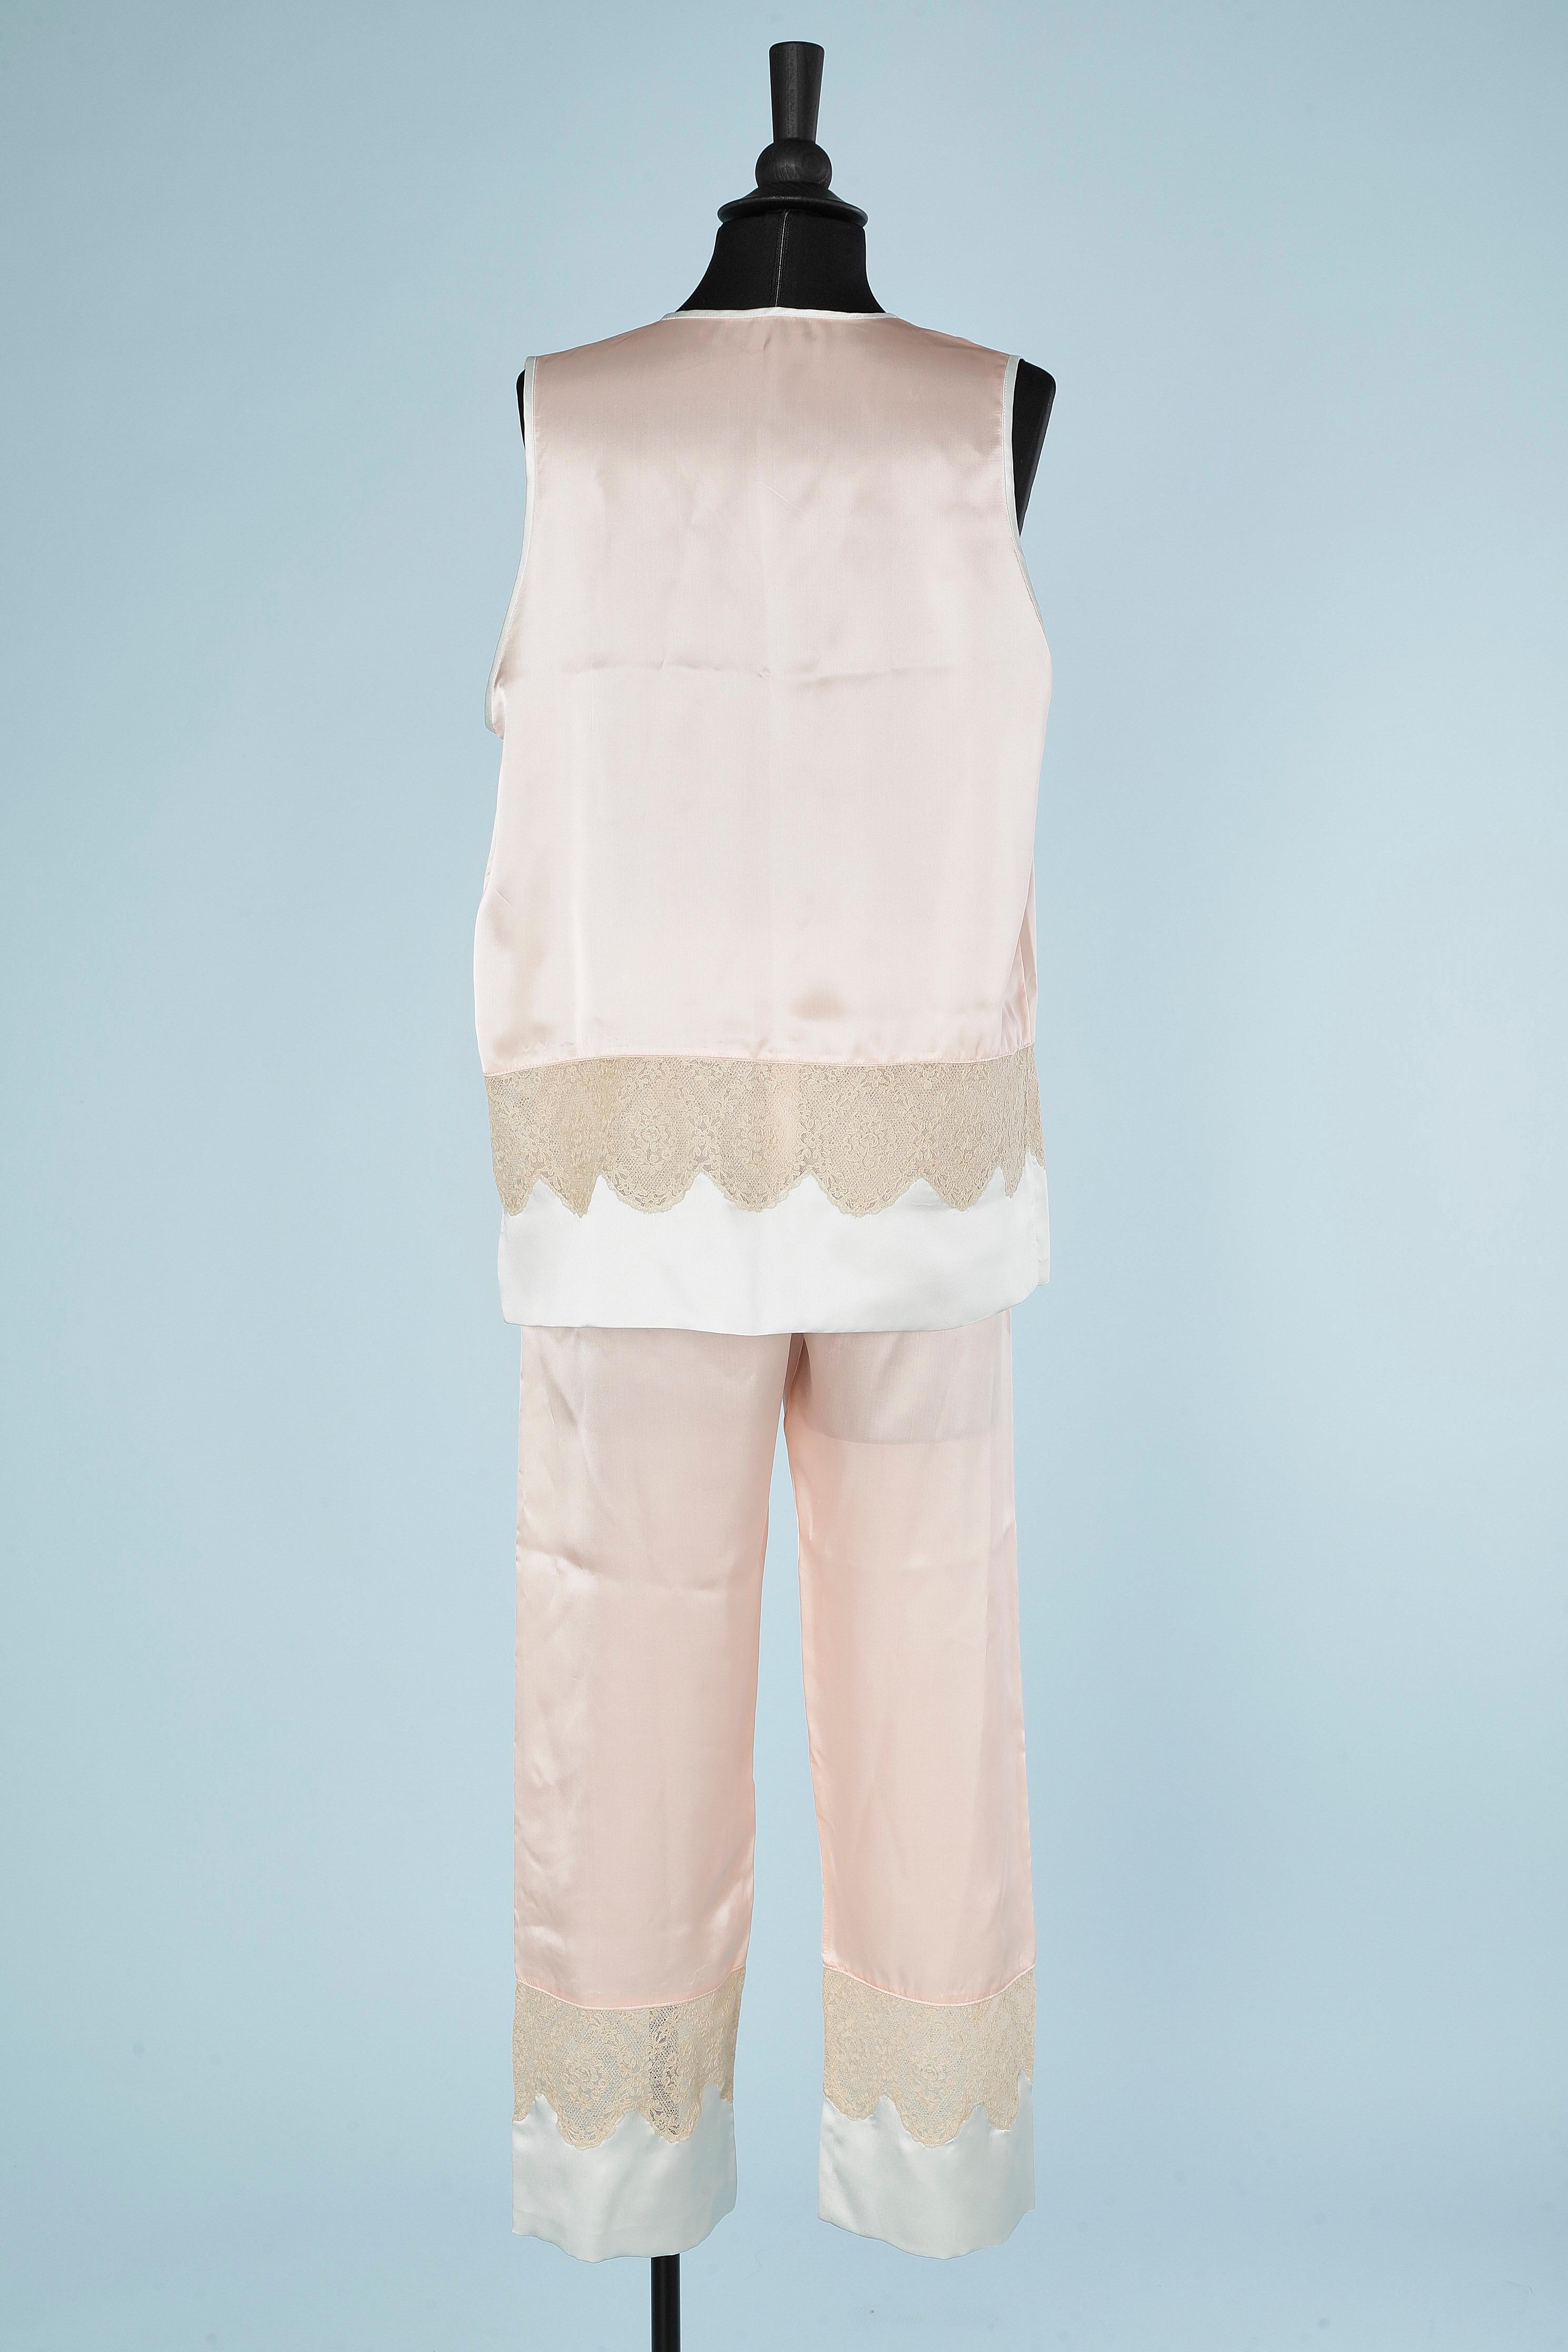 Robe and pyjamas in pastel silk satin and lace appliqué  Circa 1930 For Sale 3